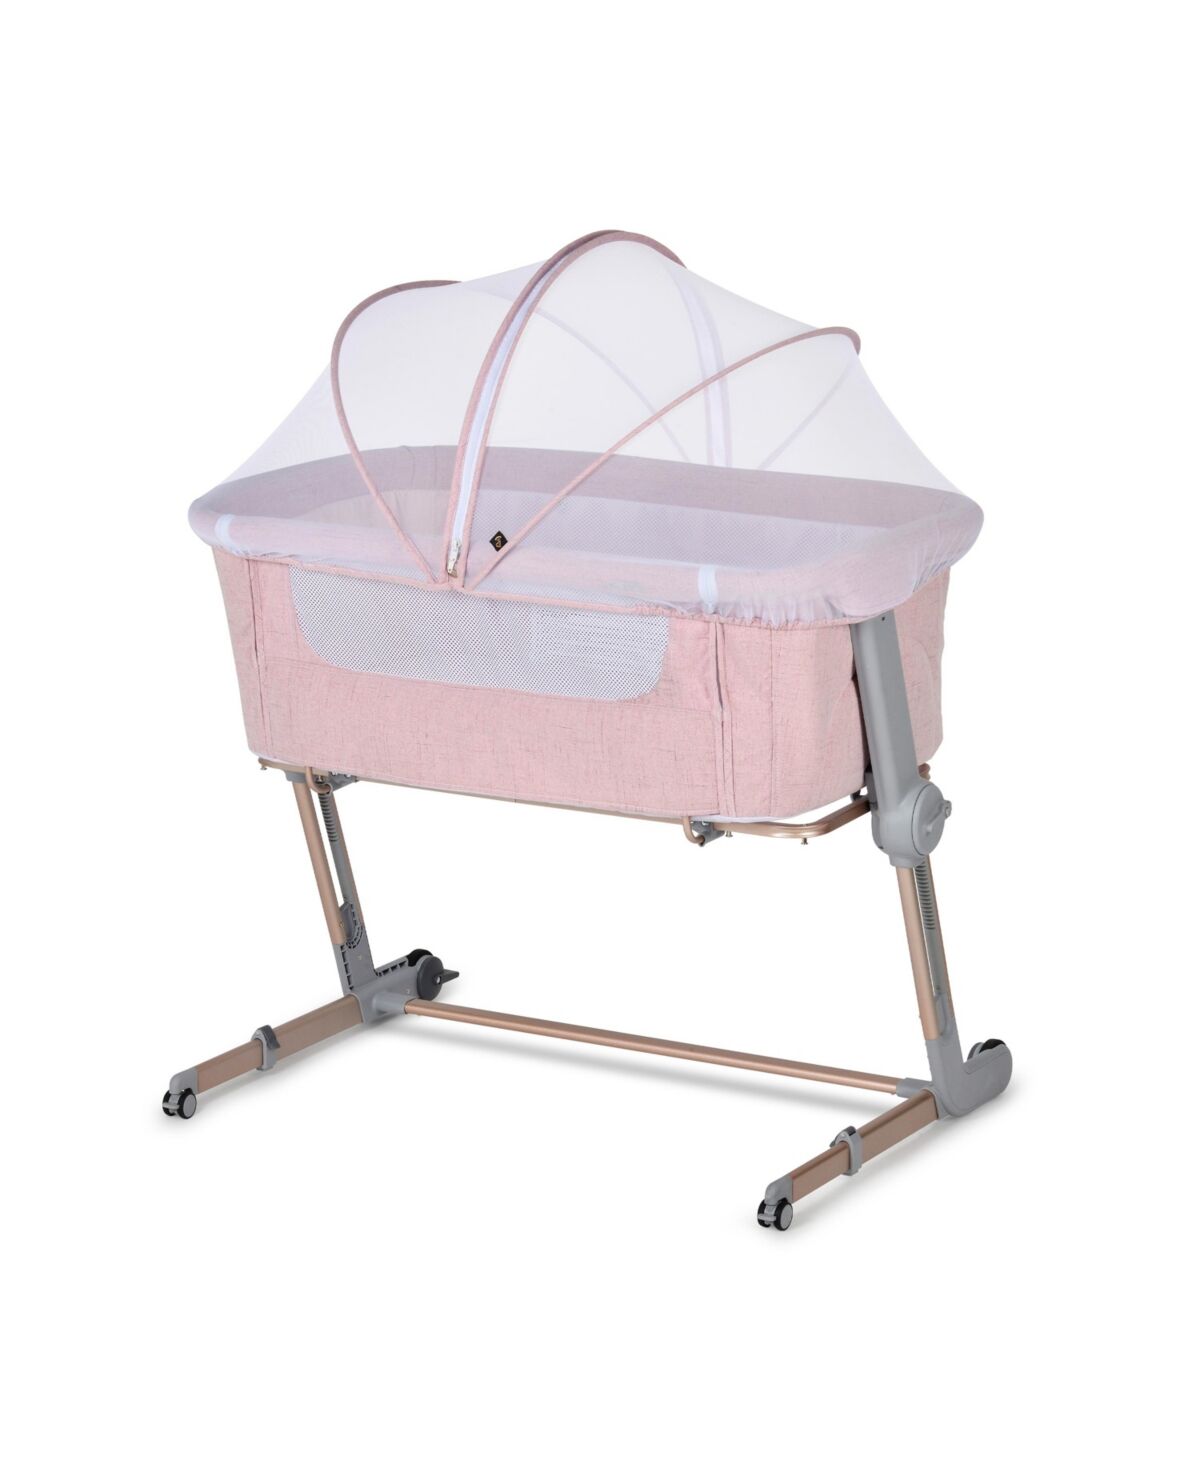 Unilove Hug Me Plus 3-in-1 Bedside Sleeper & Portable Bassinet with Mosquito Net - Plum Pink